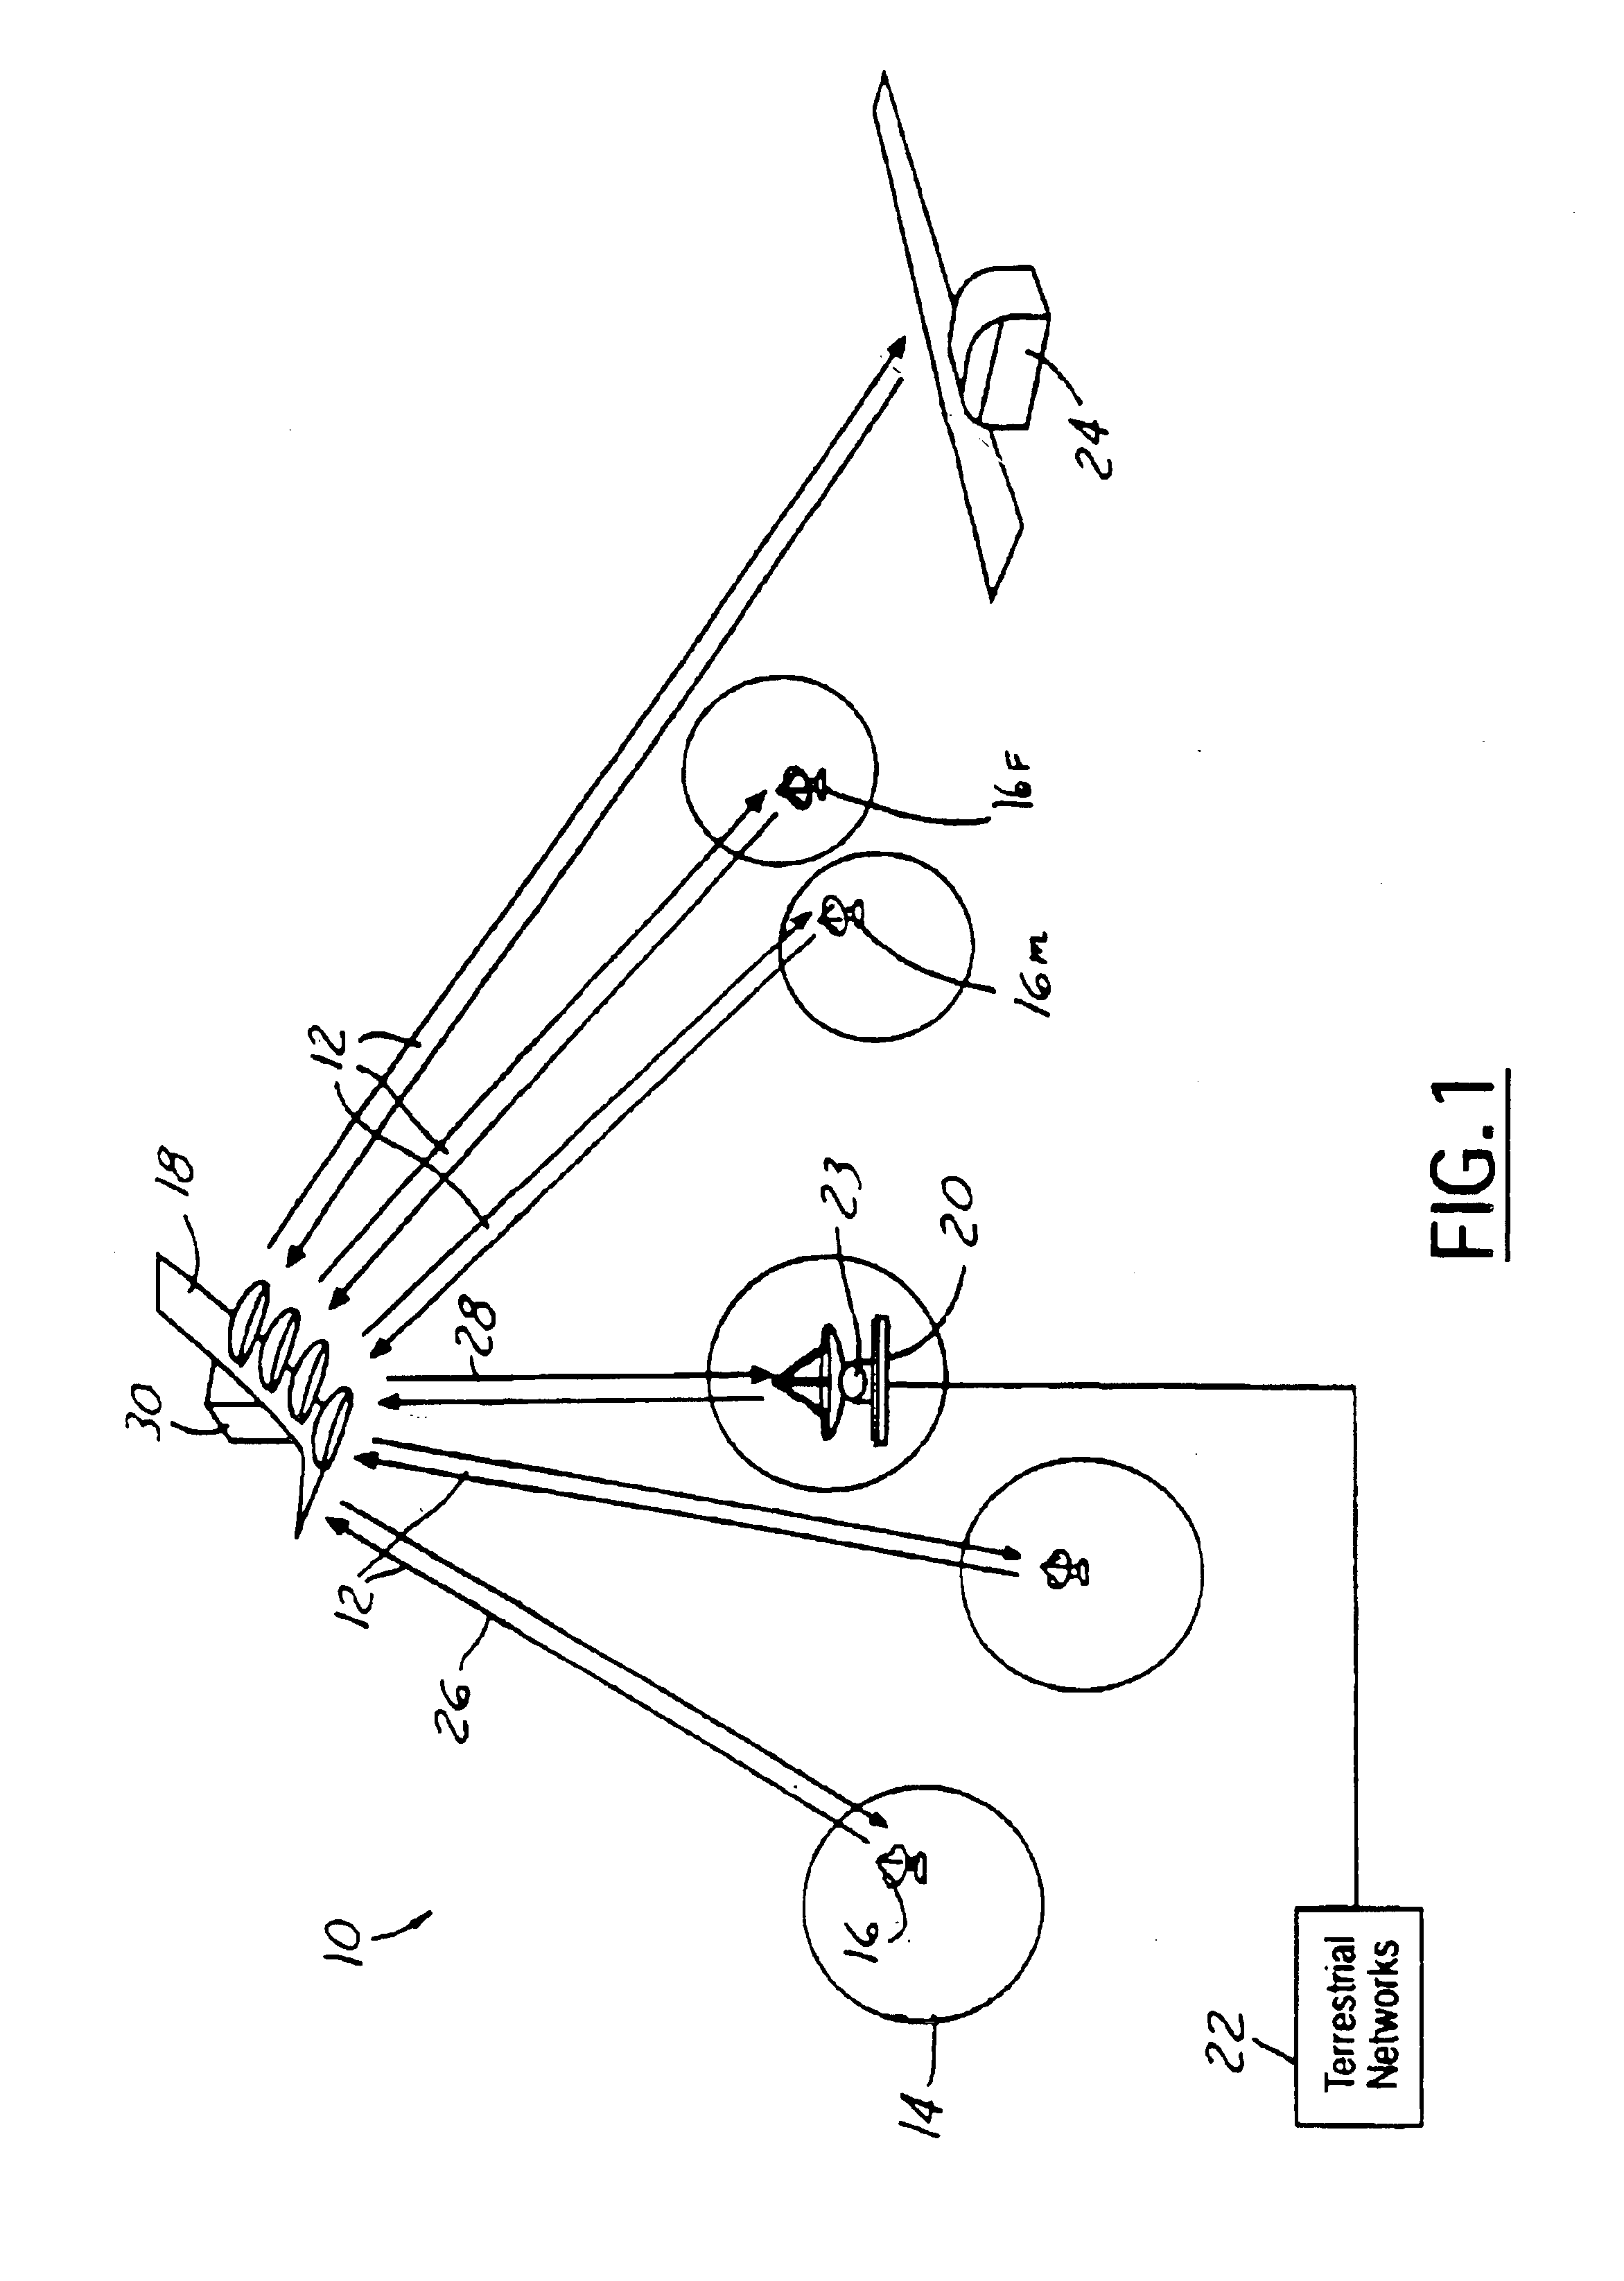 Stratospheric-based communication system for mobile users having adaptive interference rejection